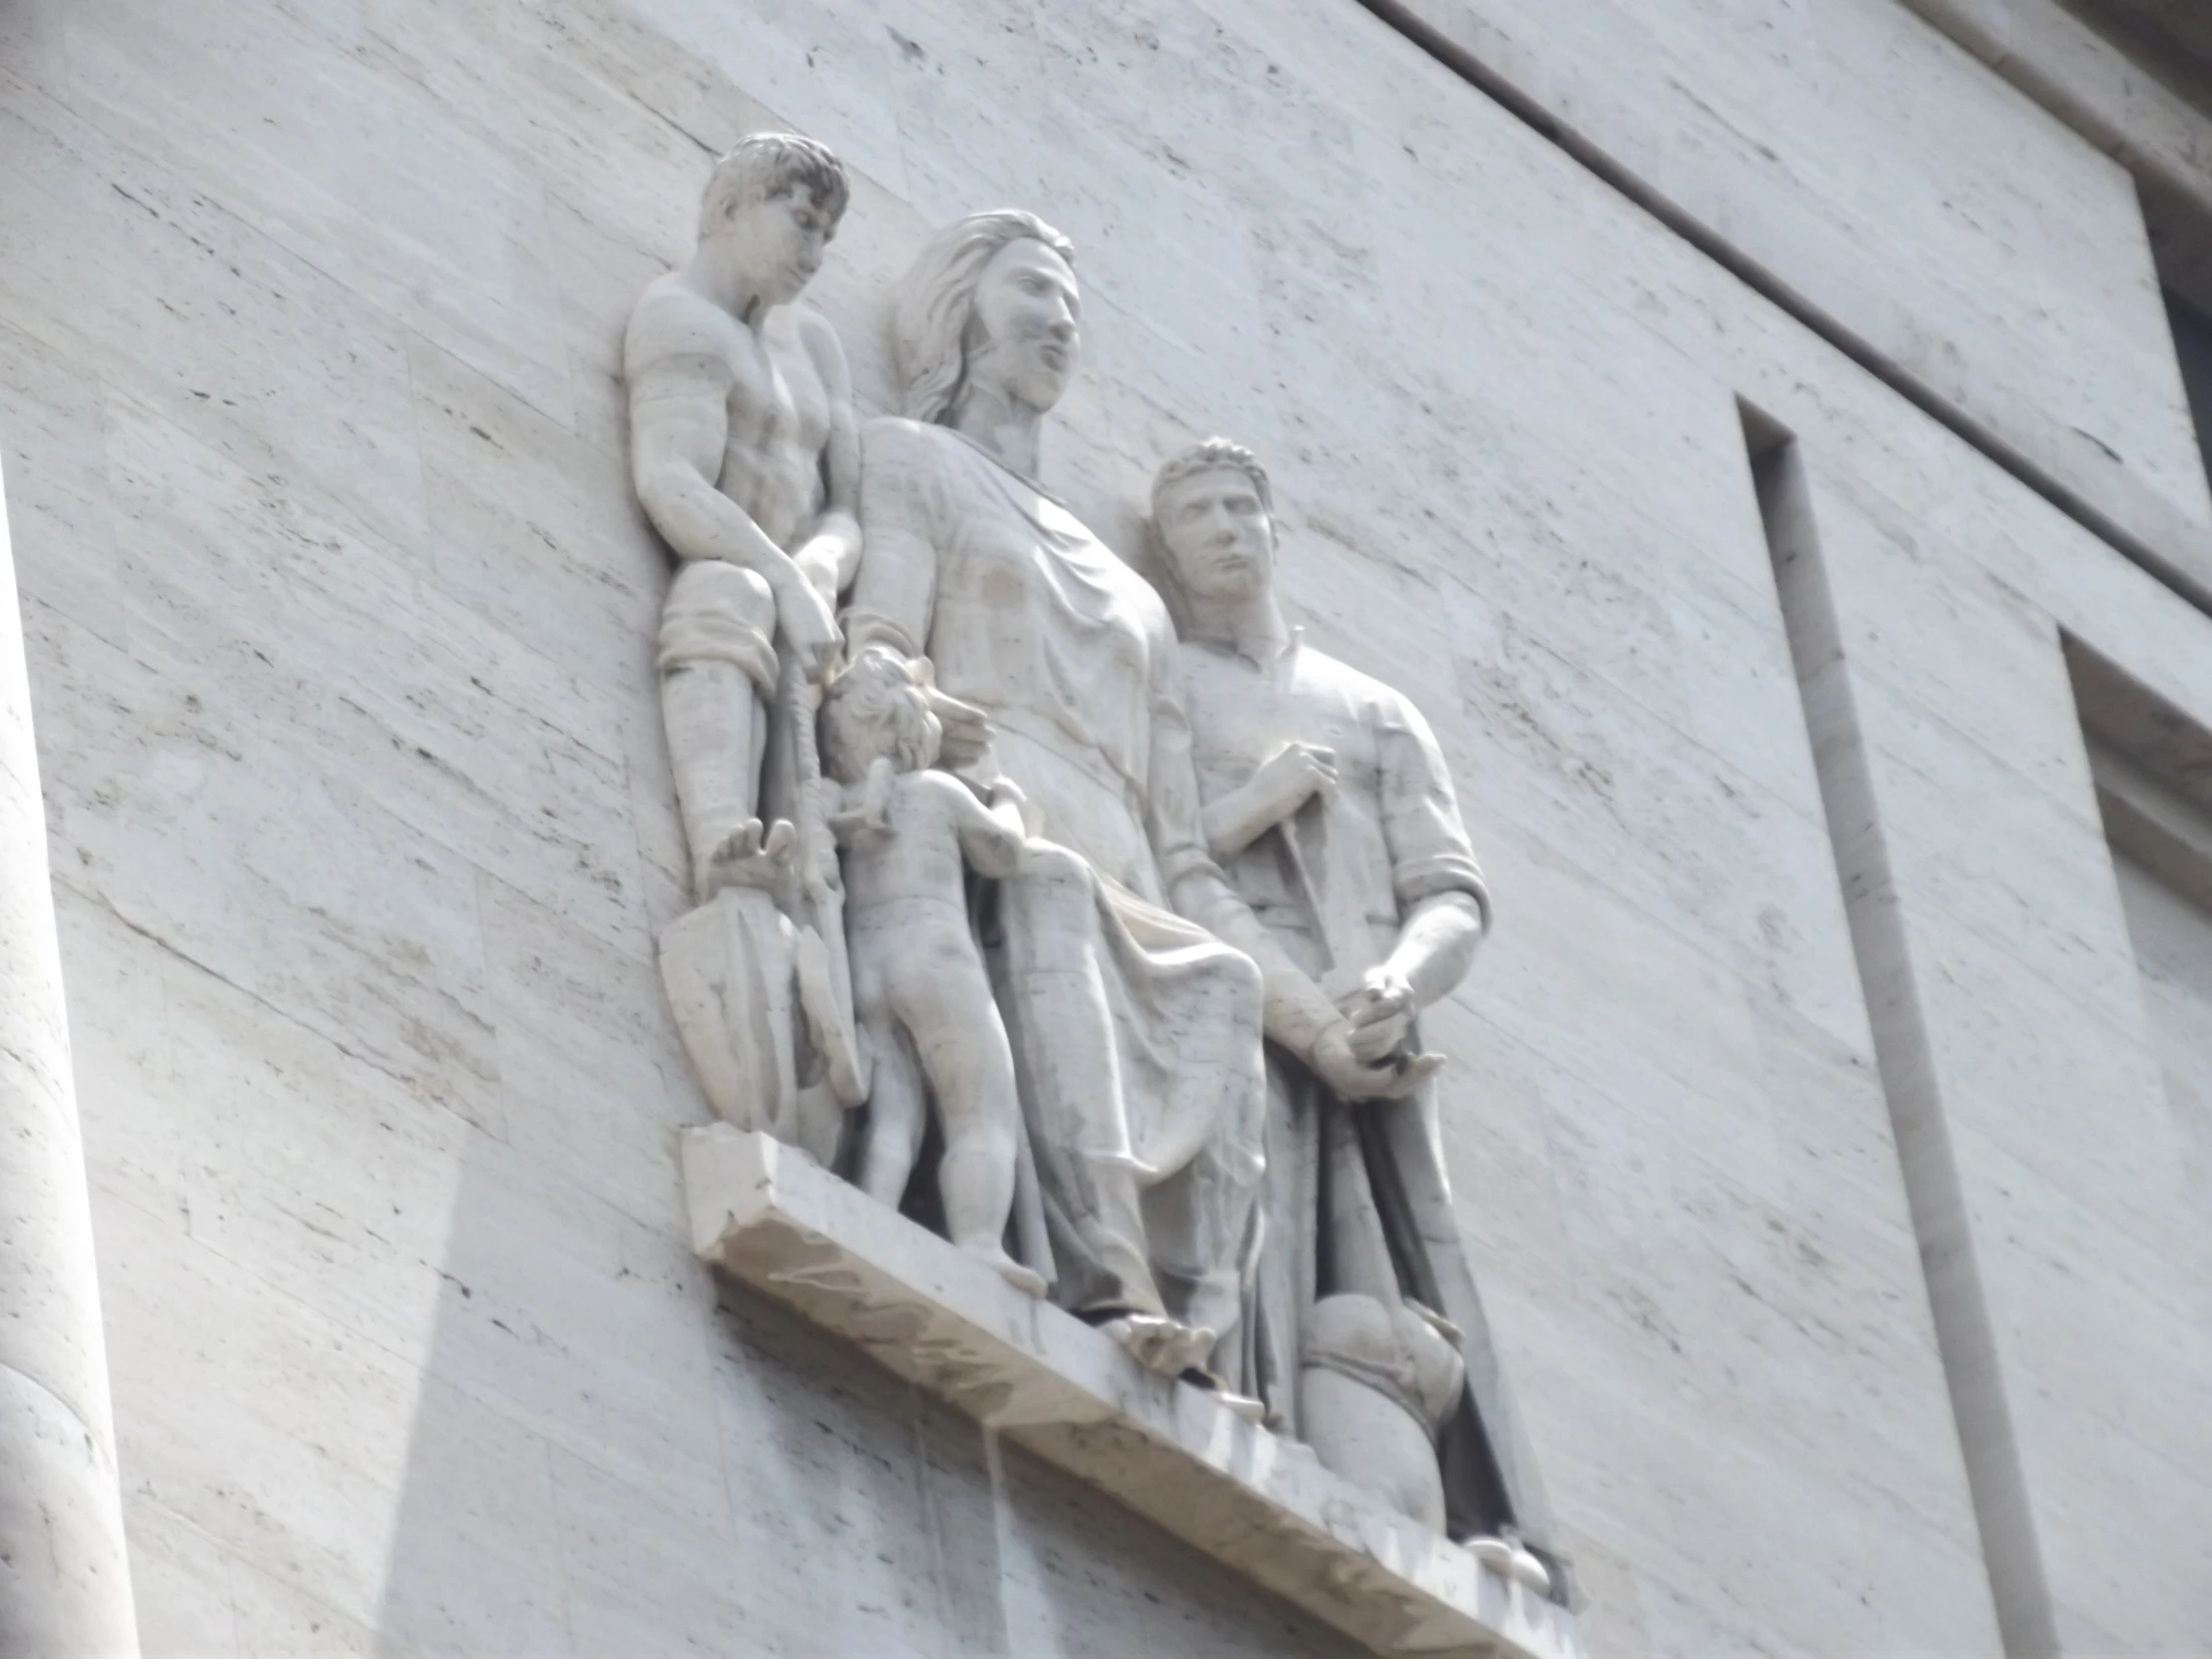 this is an image of some statues on the side of a building